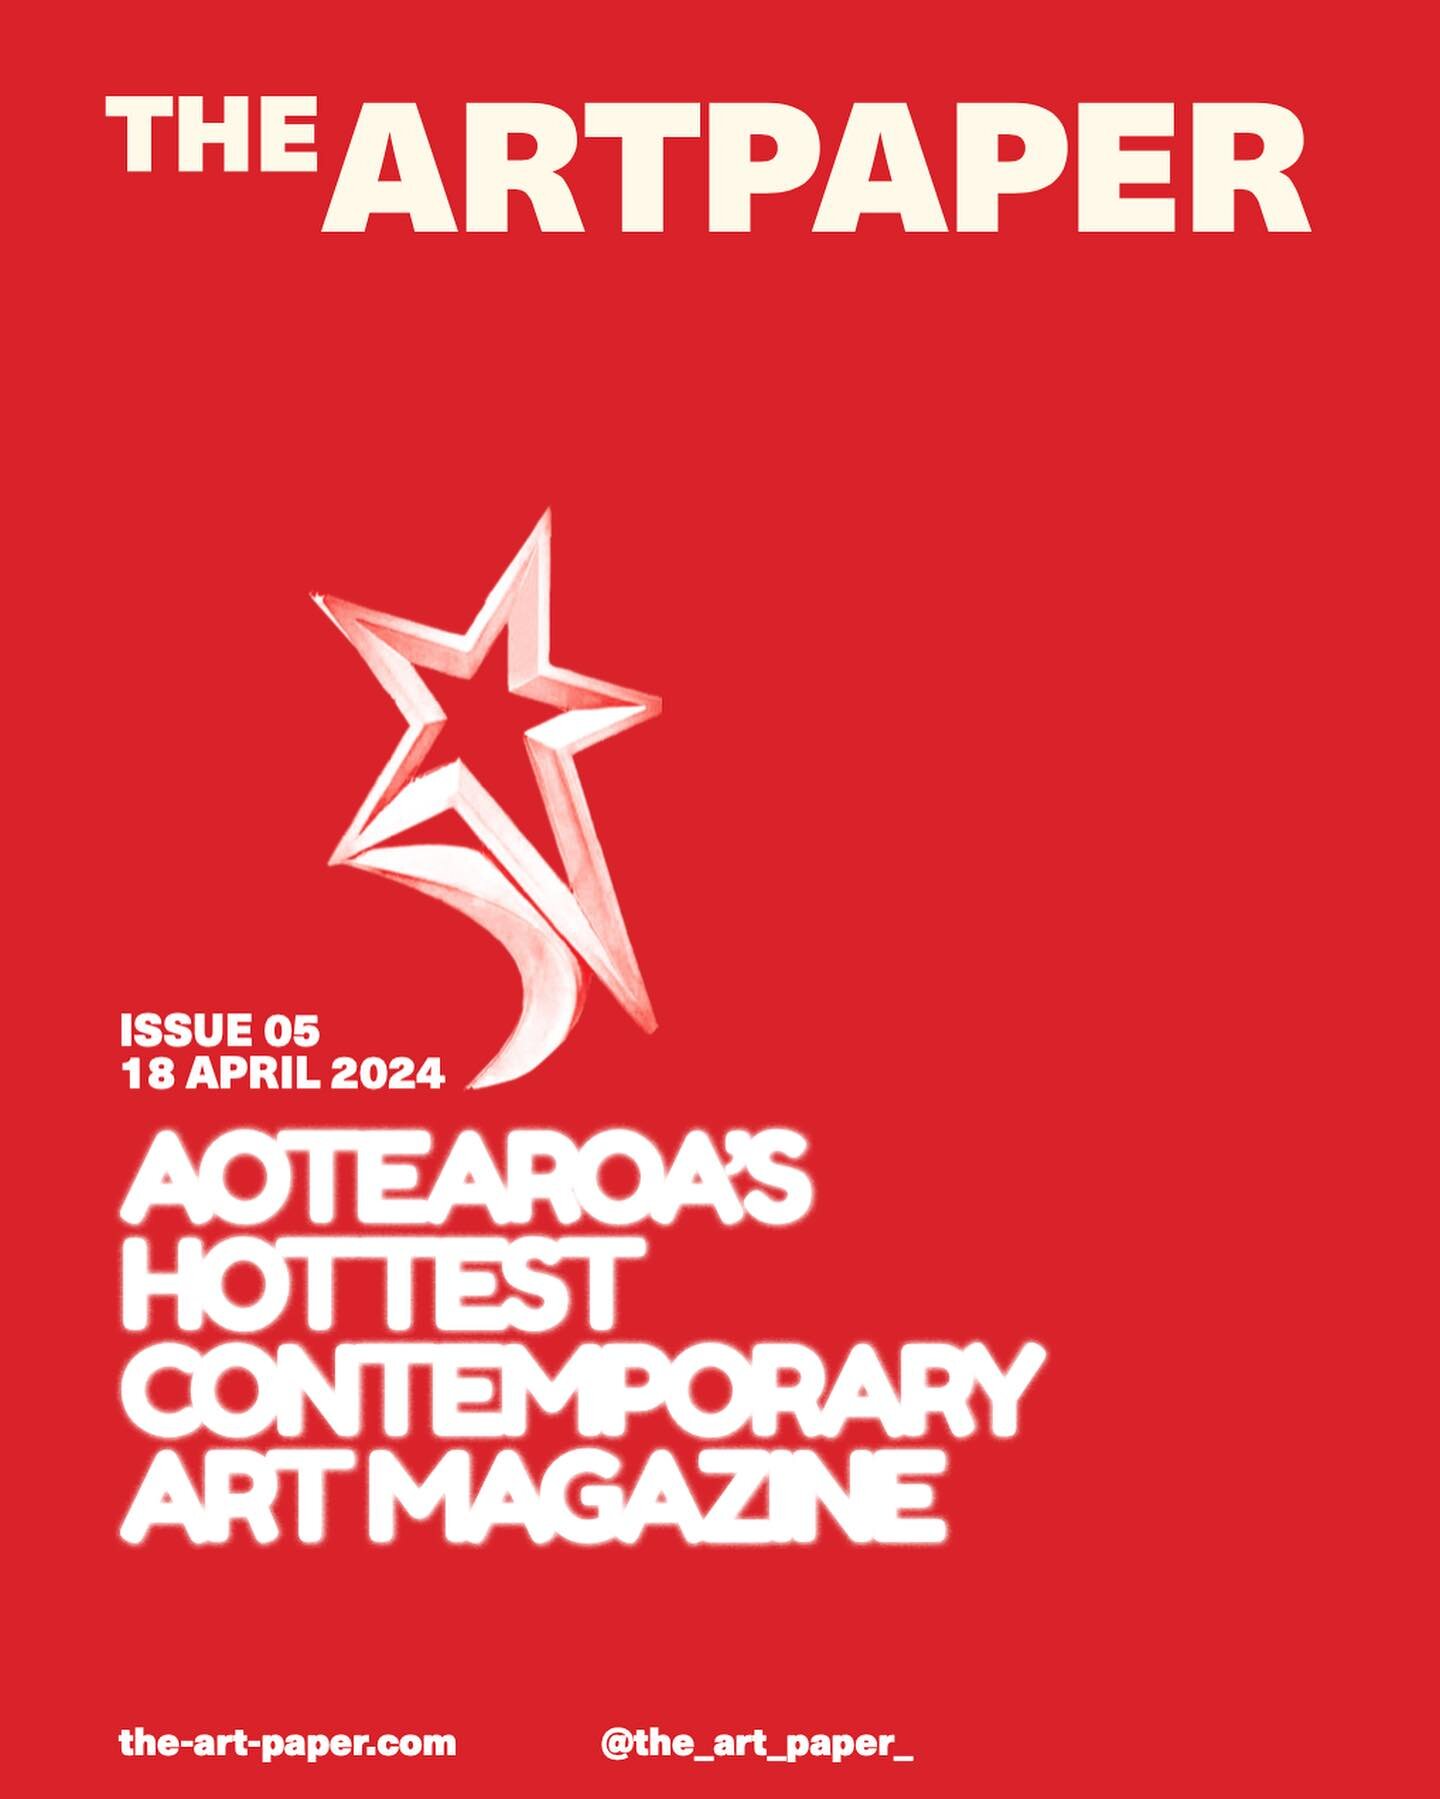 THE ART PAPER ISSUE 05 COMING 18 APRIL.
Mark it in your diaries sweeties! 💋💋